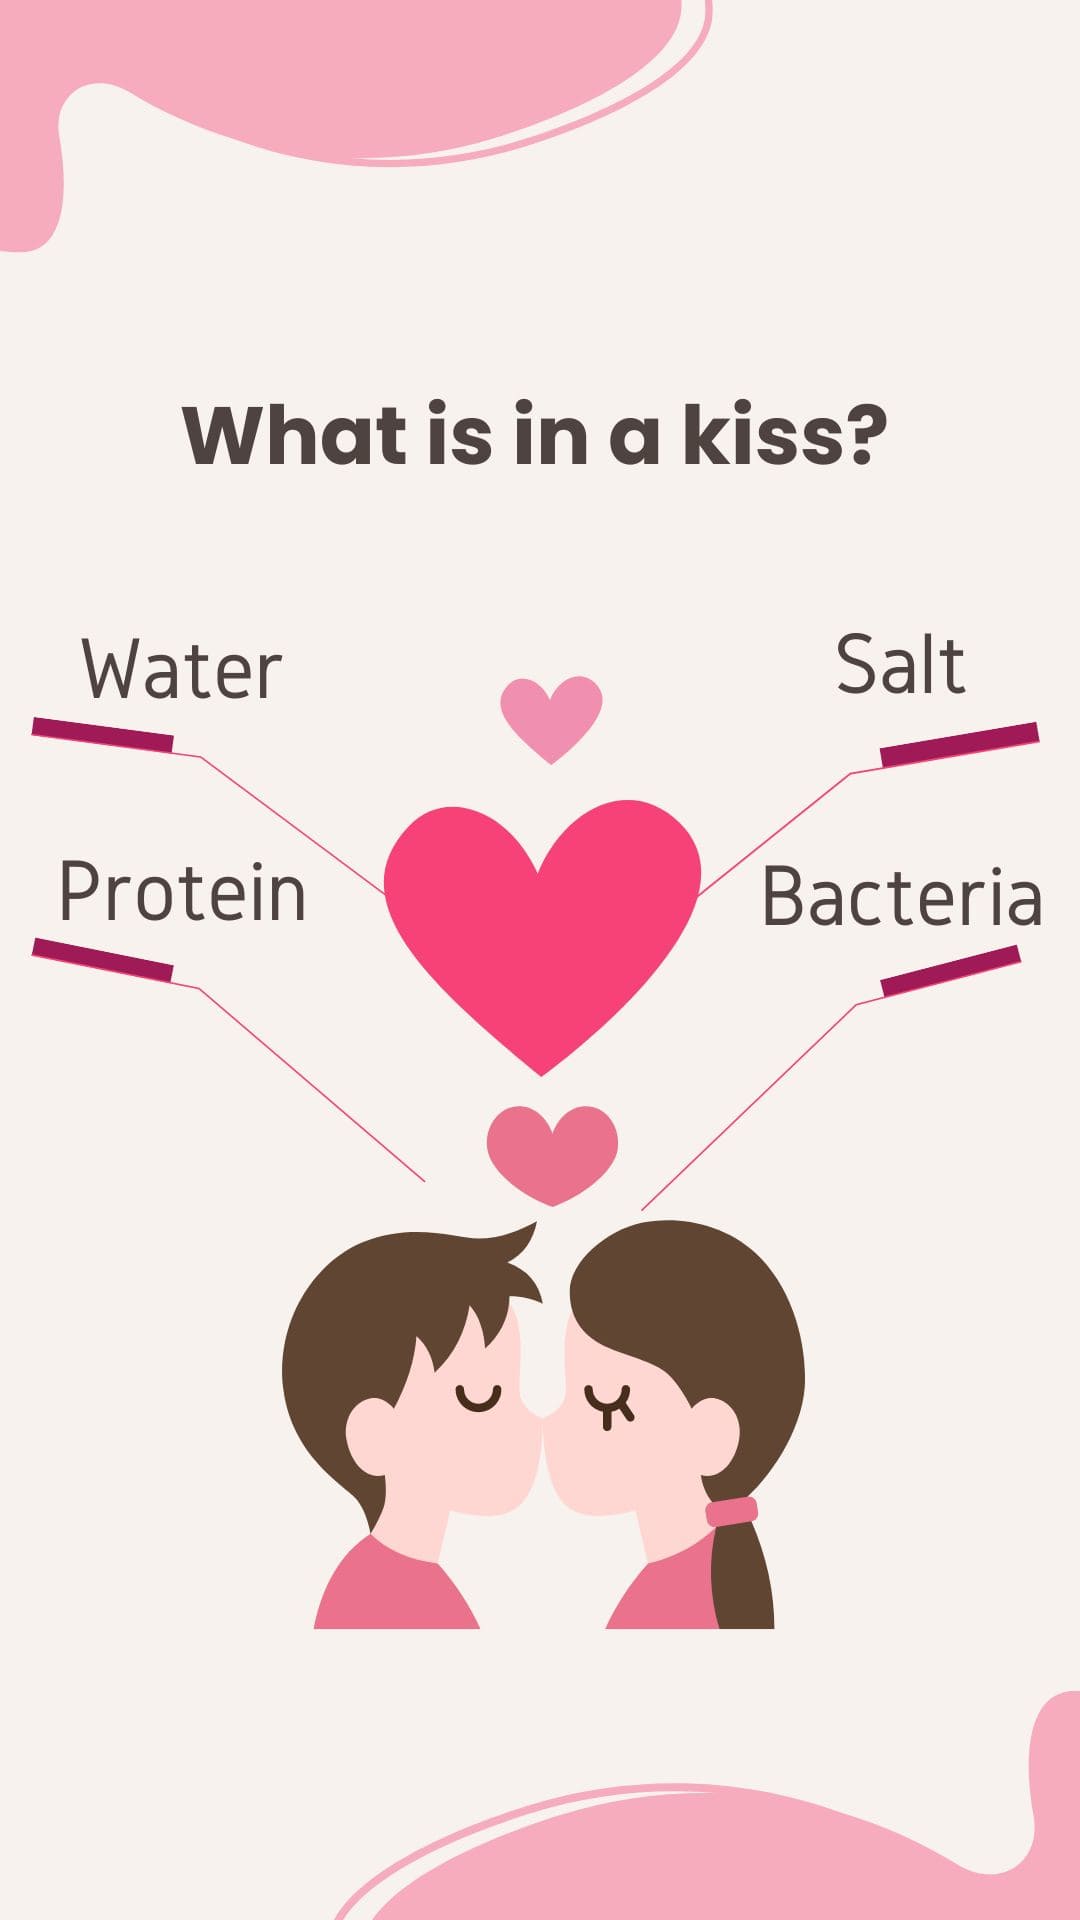  Reddit "how to be a good kisser"